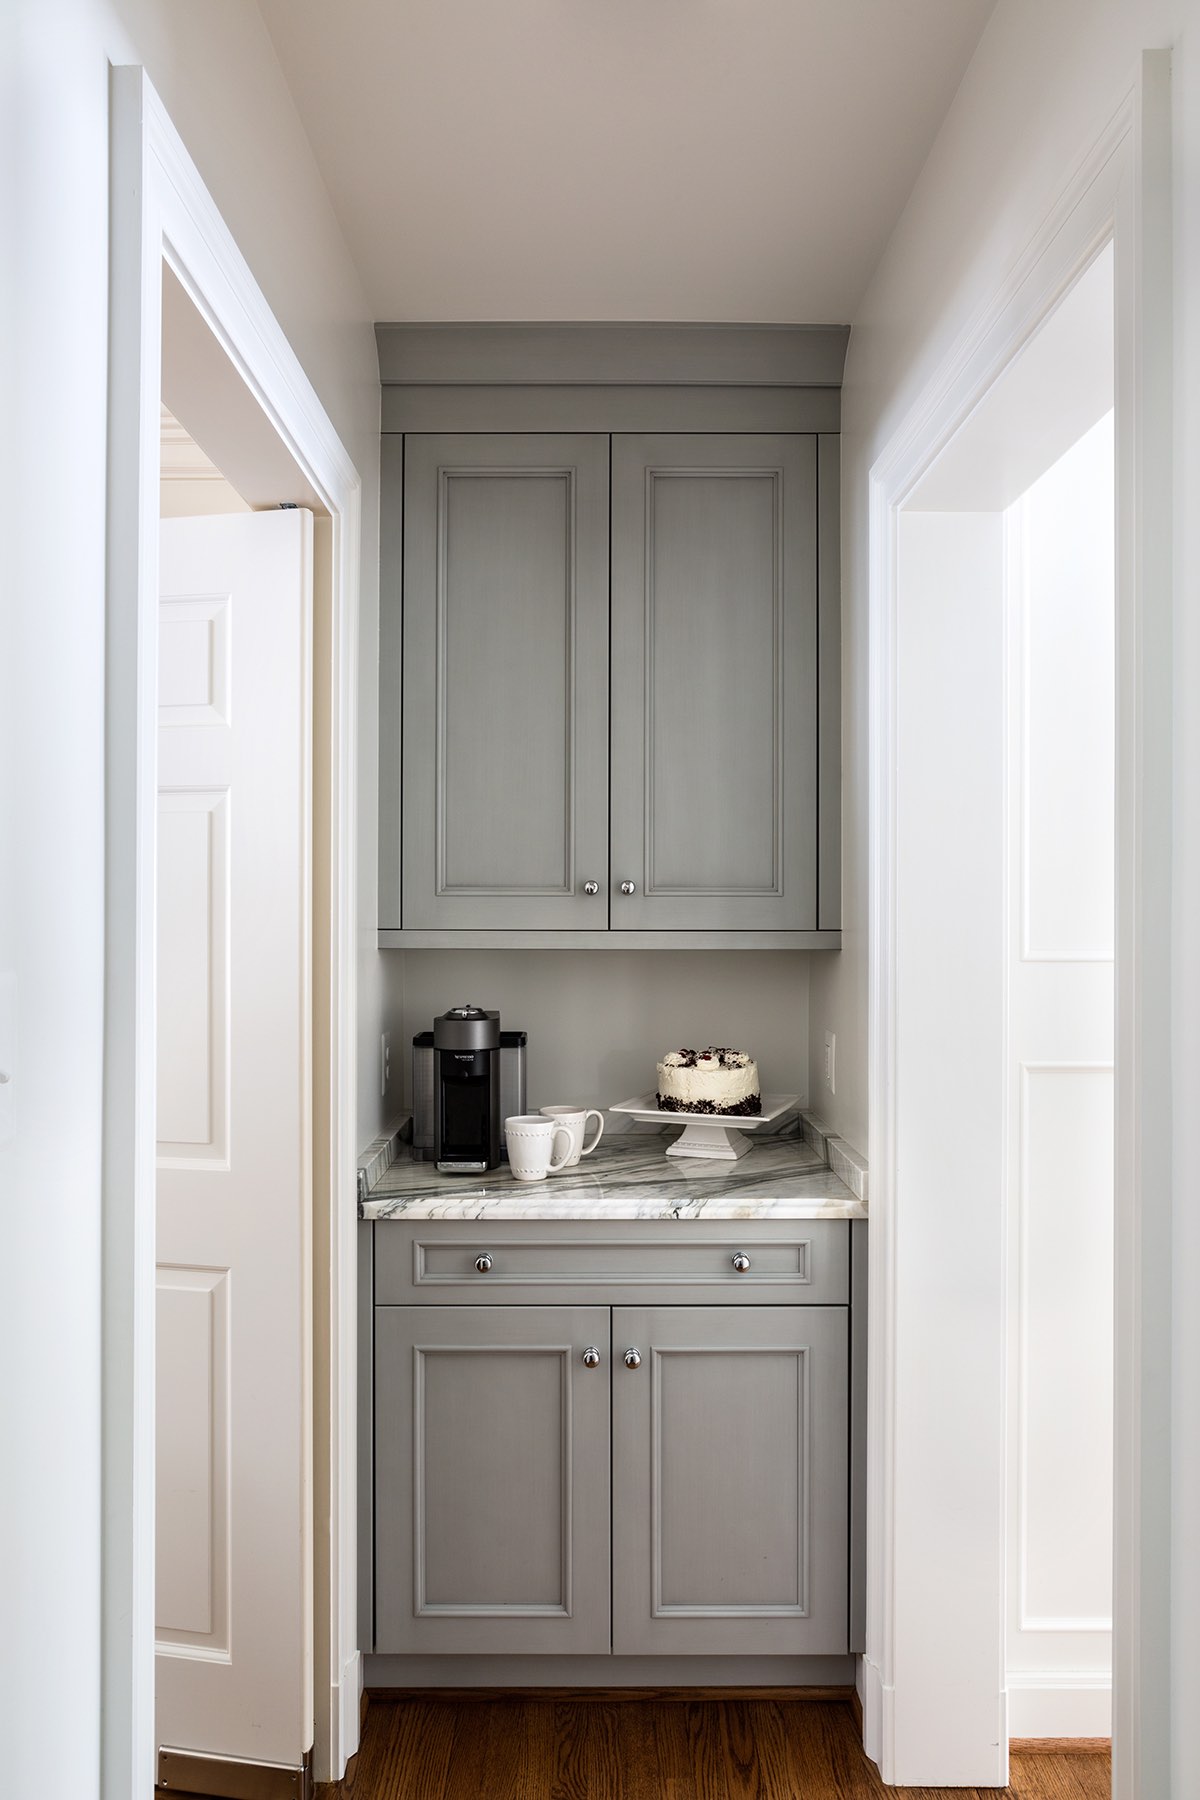 Custom-built butler’s pantry off home kitchen with gray cabinetry